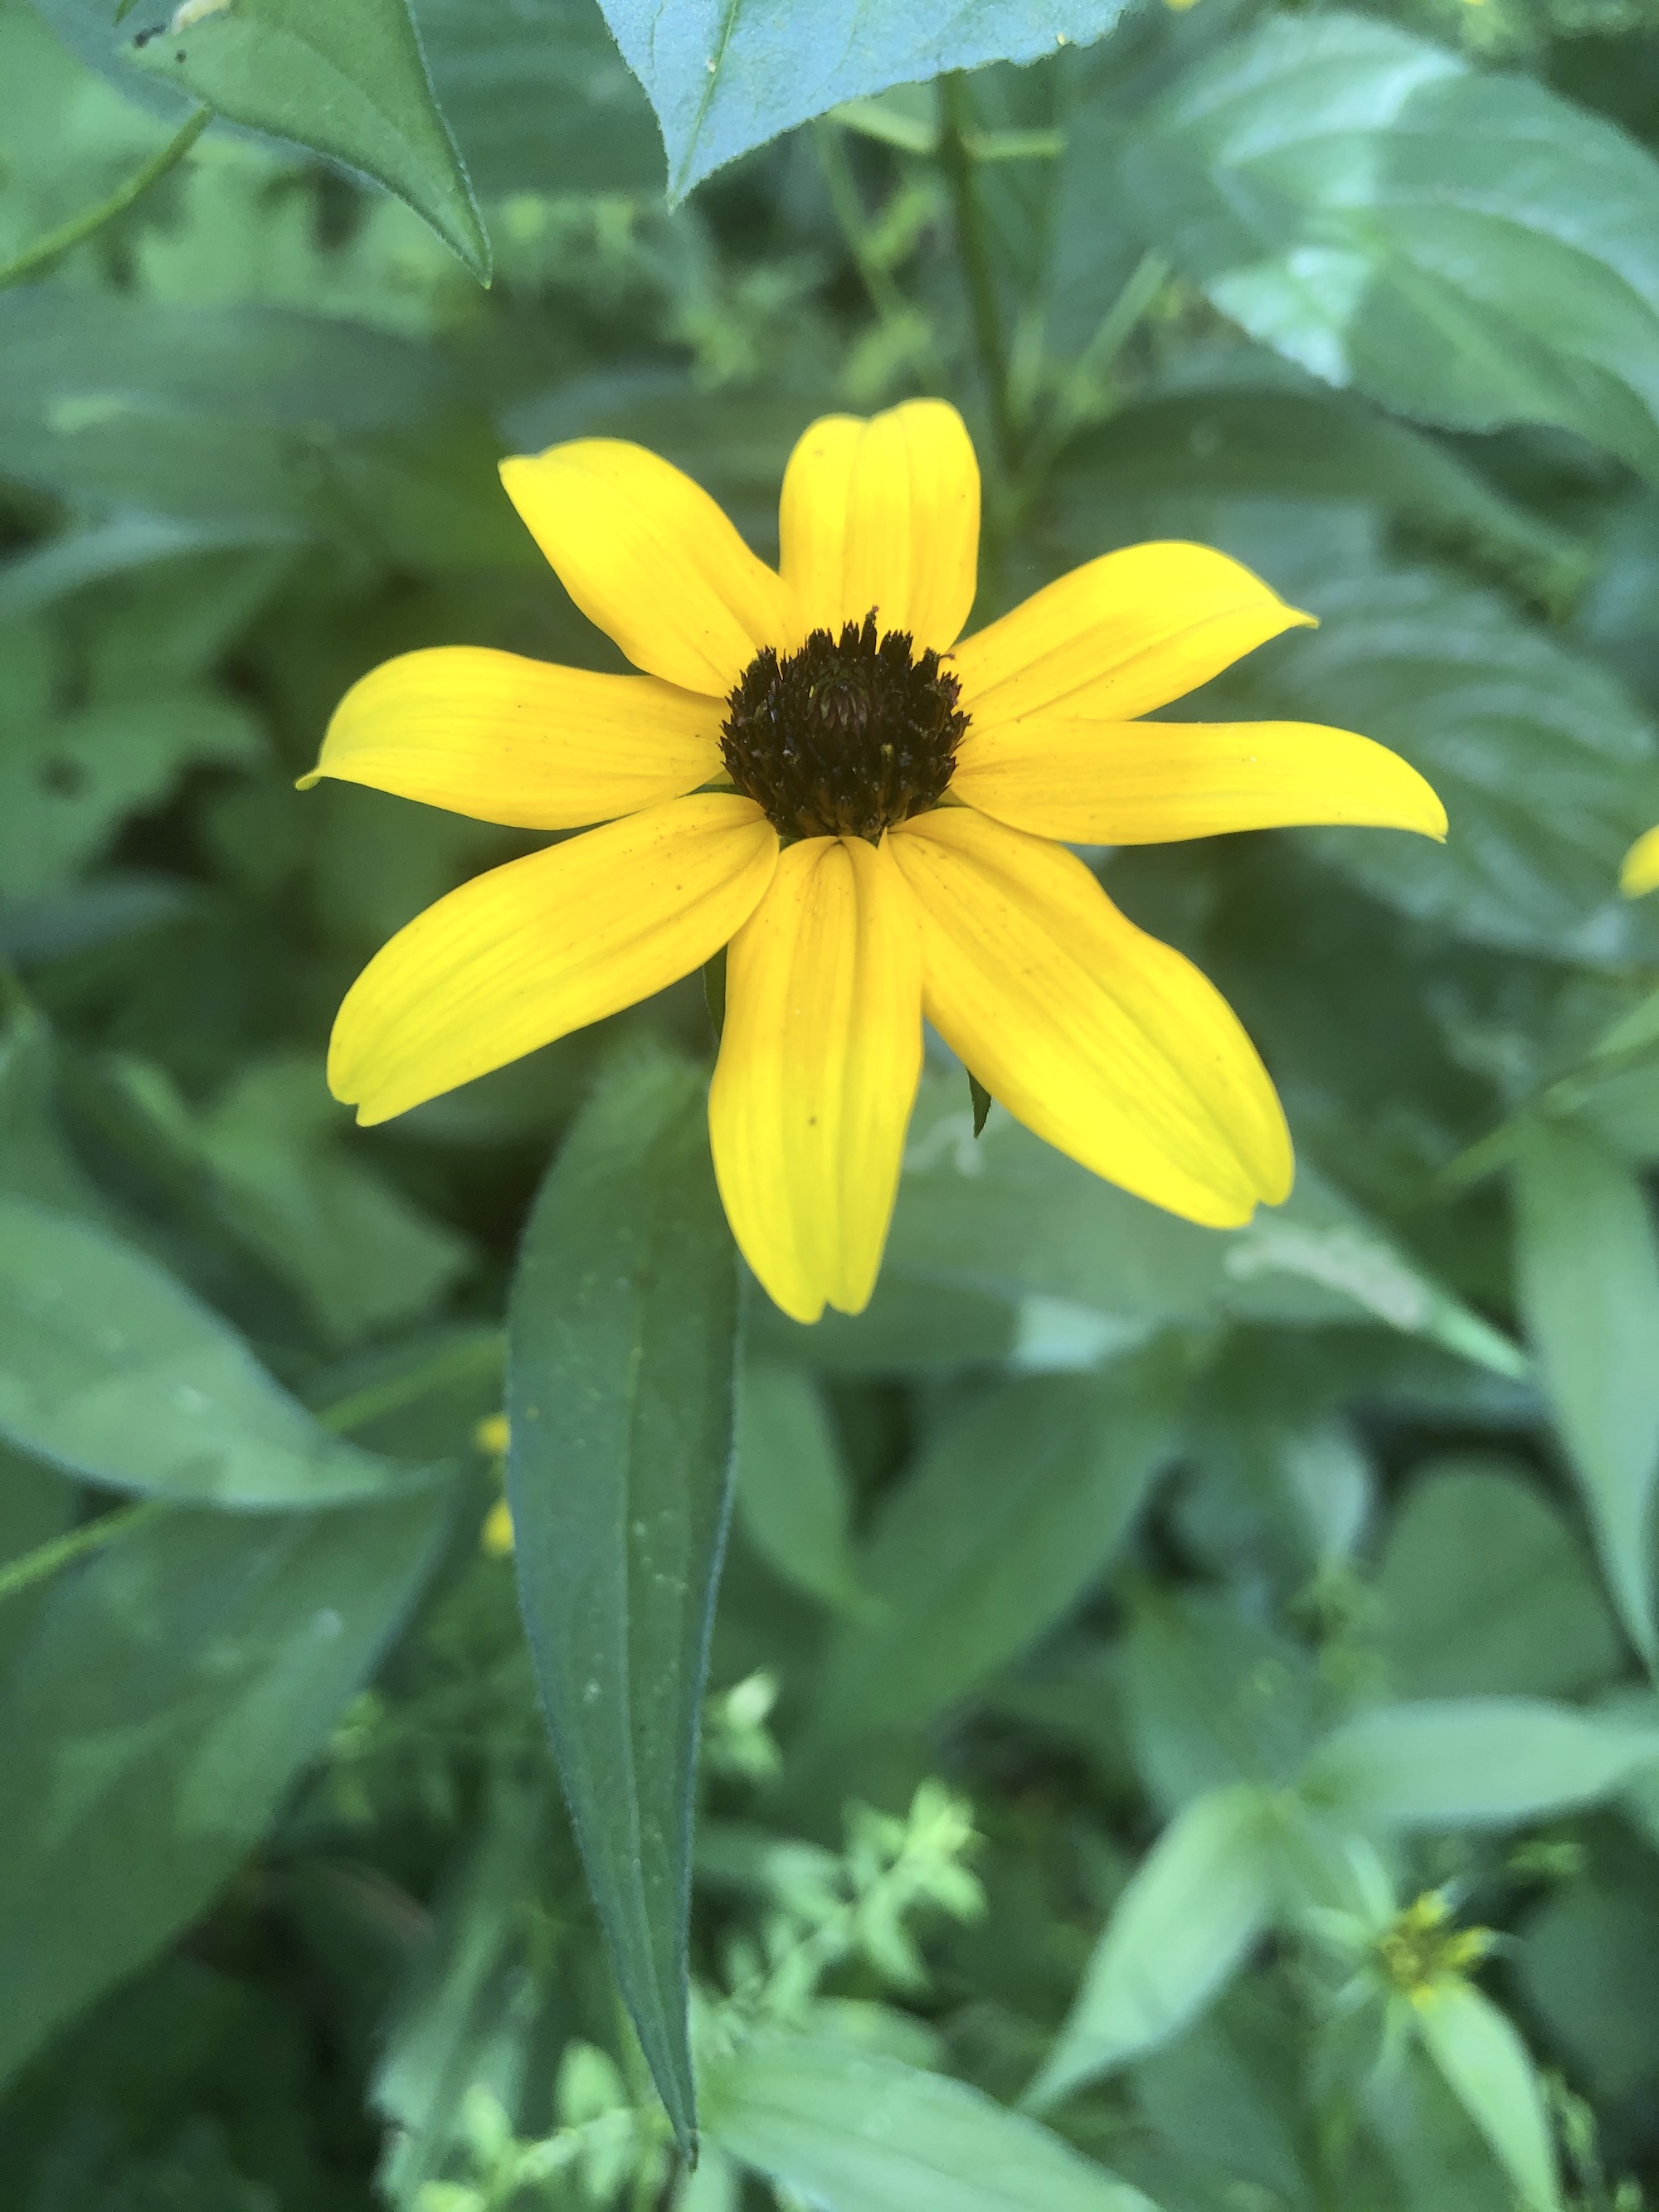 Brown-eyed Susan on bank of retaining pond in Madison, Wisconsin on July 25, 2020.